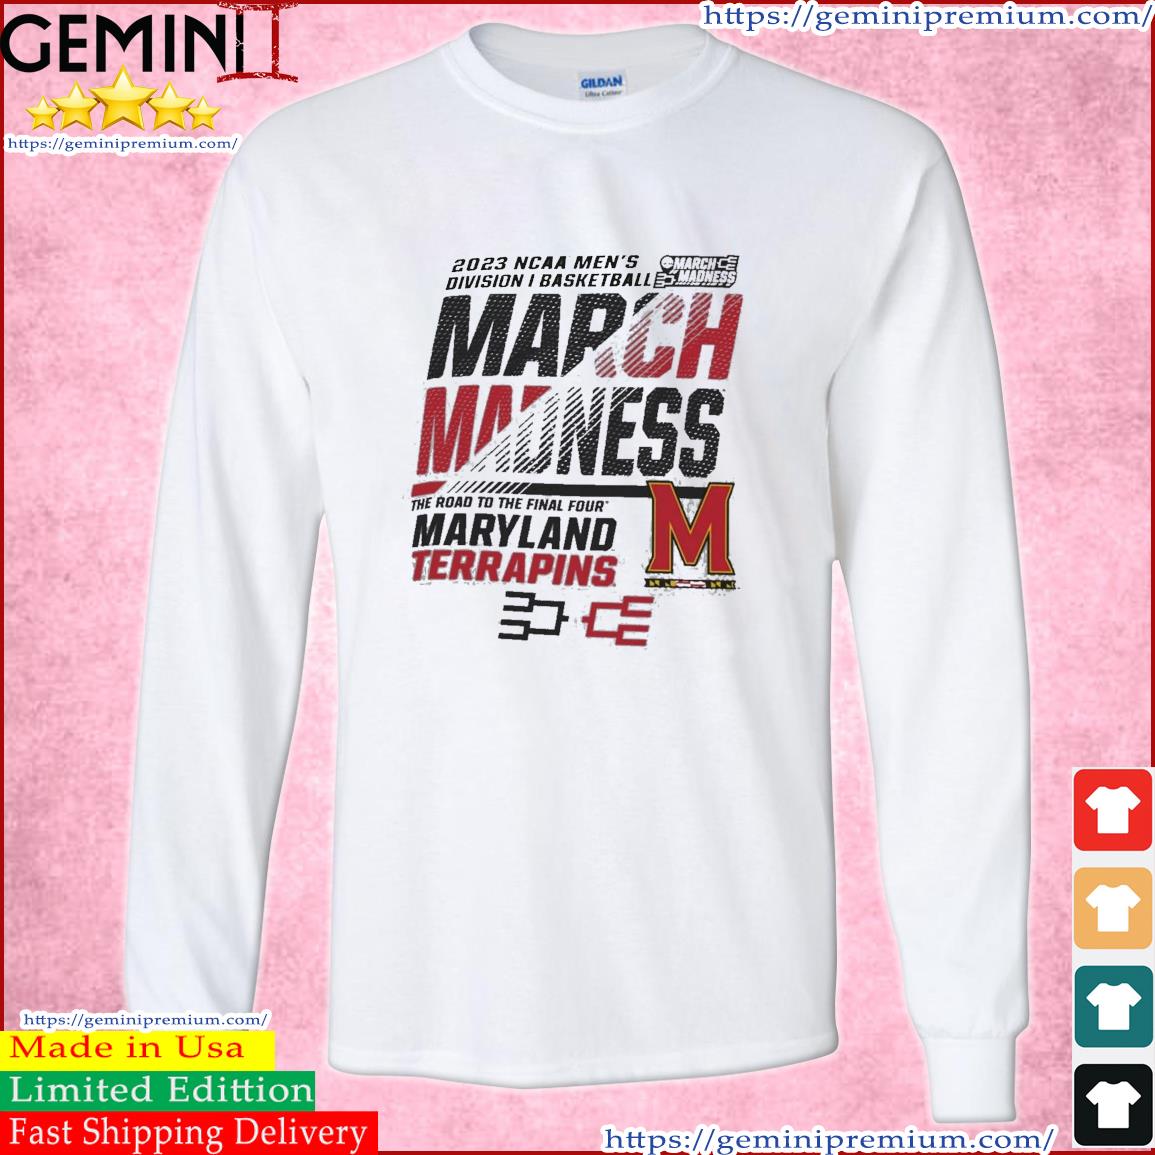 Maryland Terrapins Men's Basketball 2023 NCAA March Madness The Road To Final Four Shirt Long Sleeve Tee